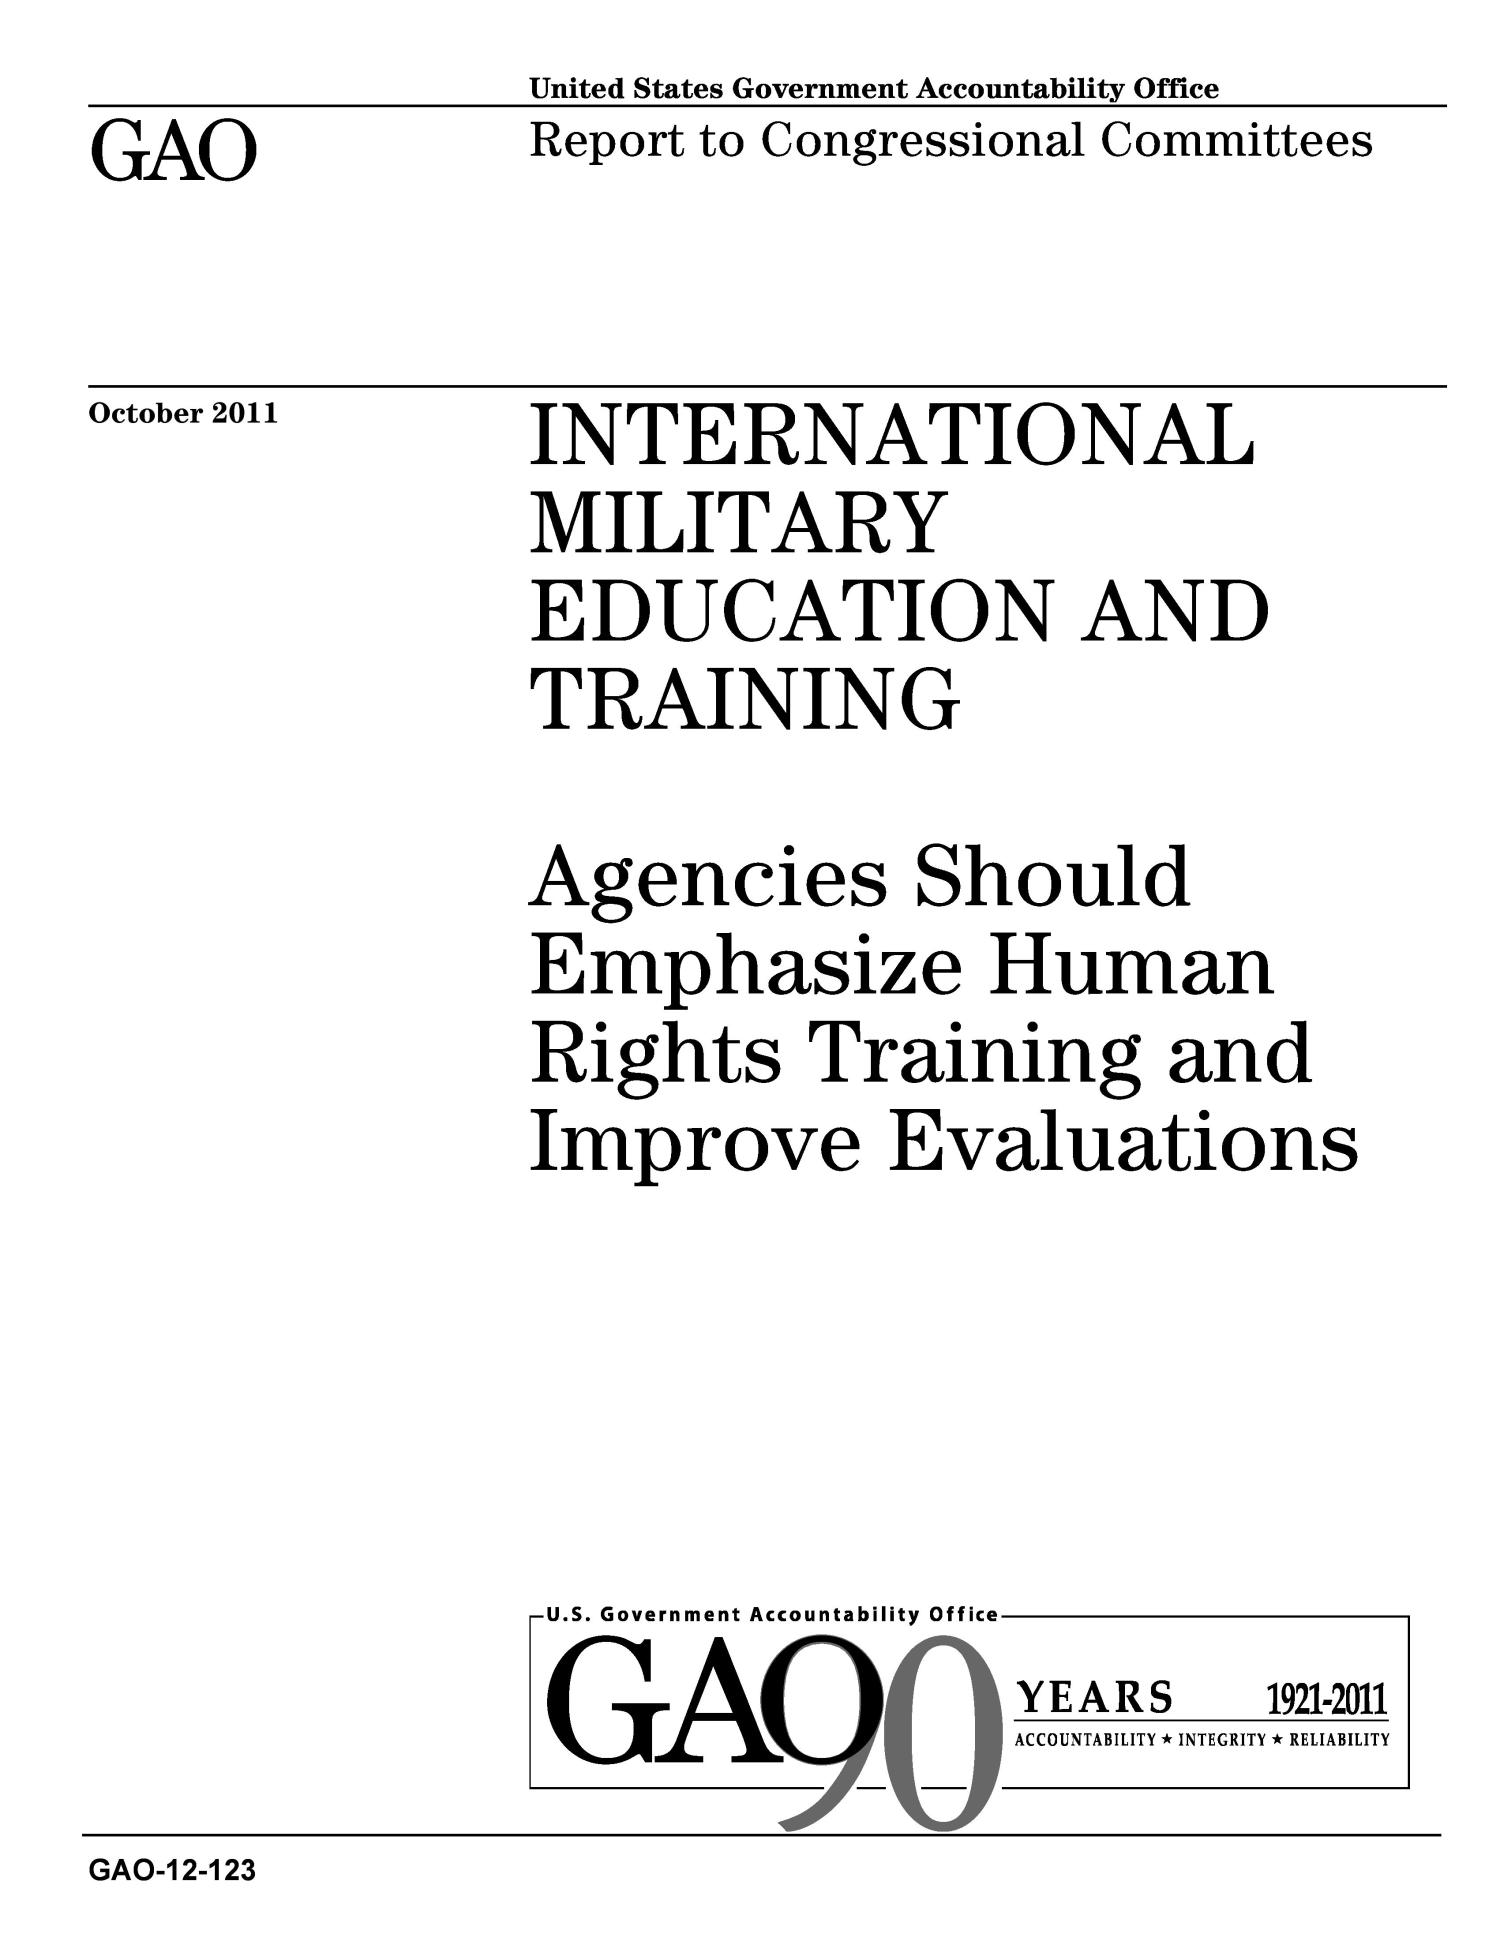 military education and training